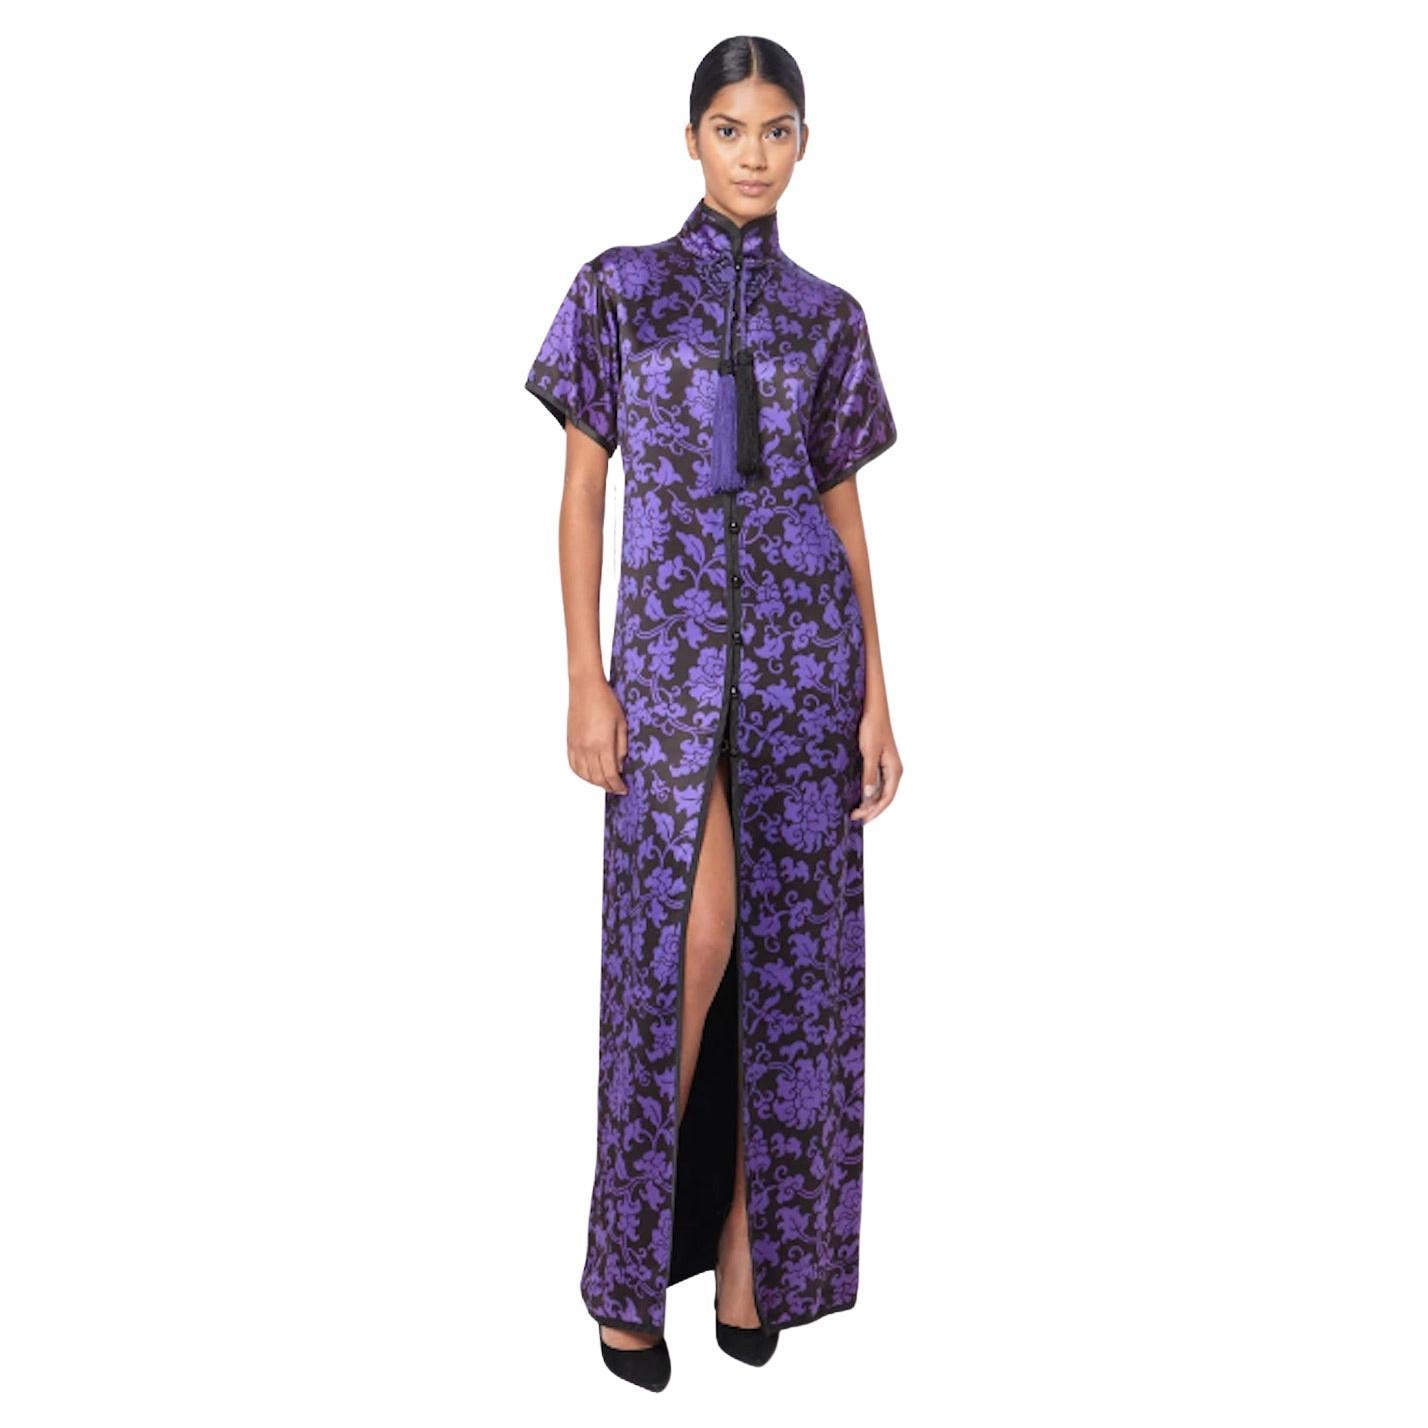 YSL Rive Gauche Chinese Collection Evening Gown For Sale